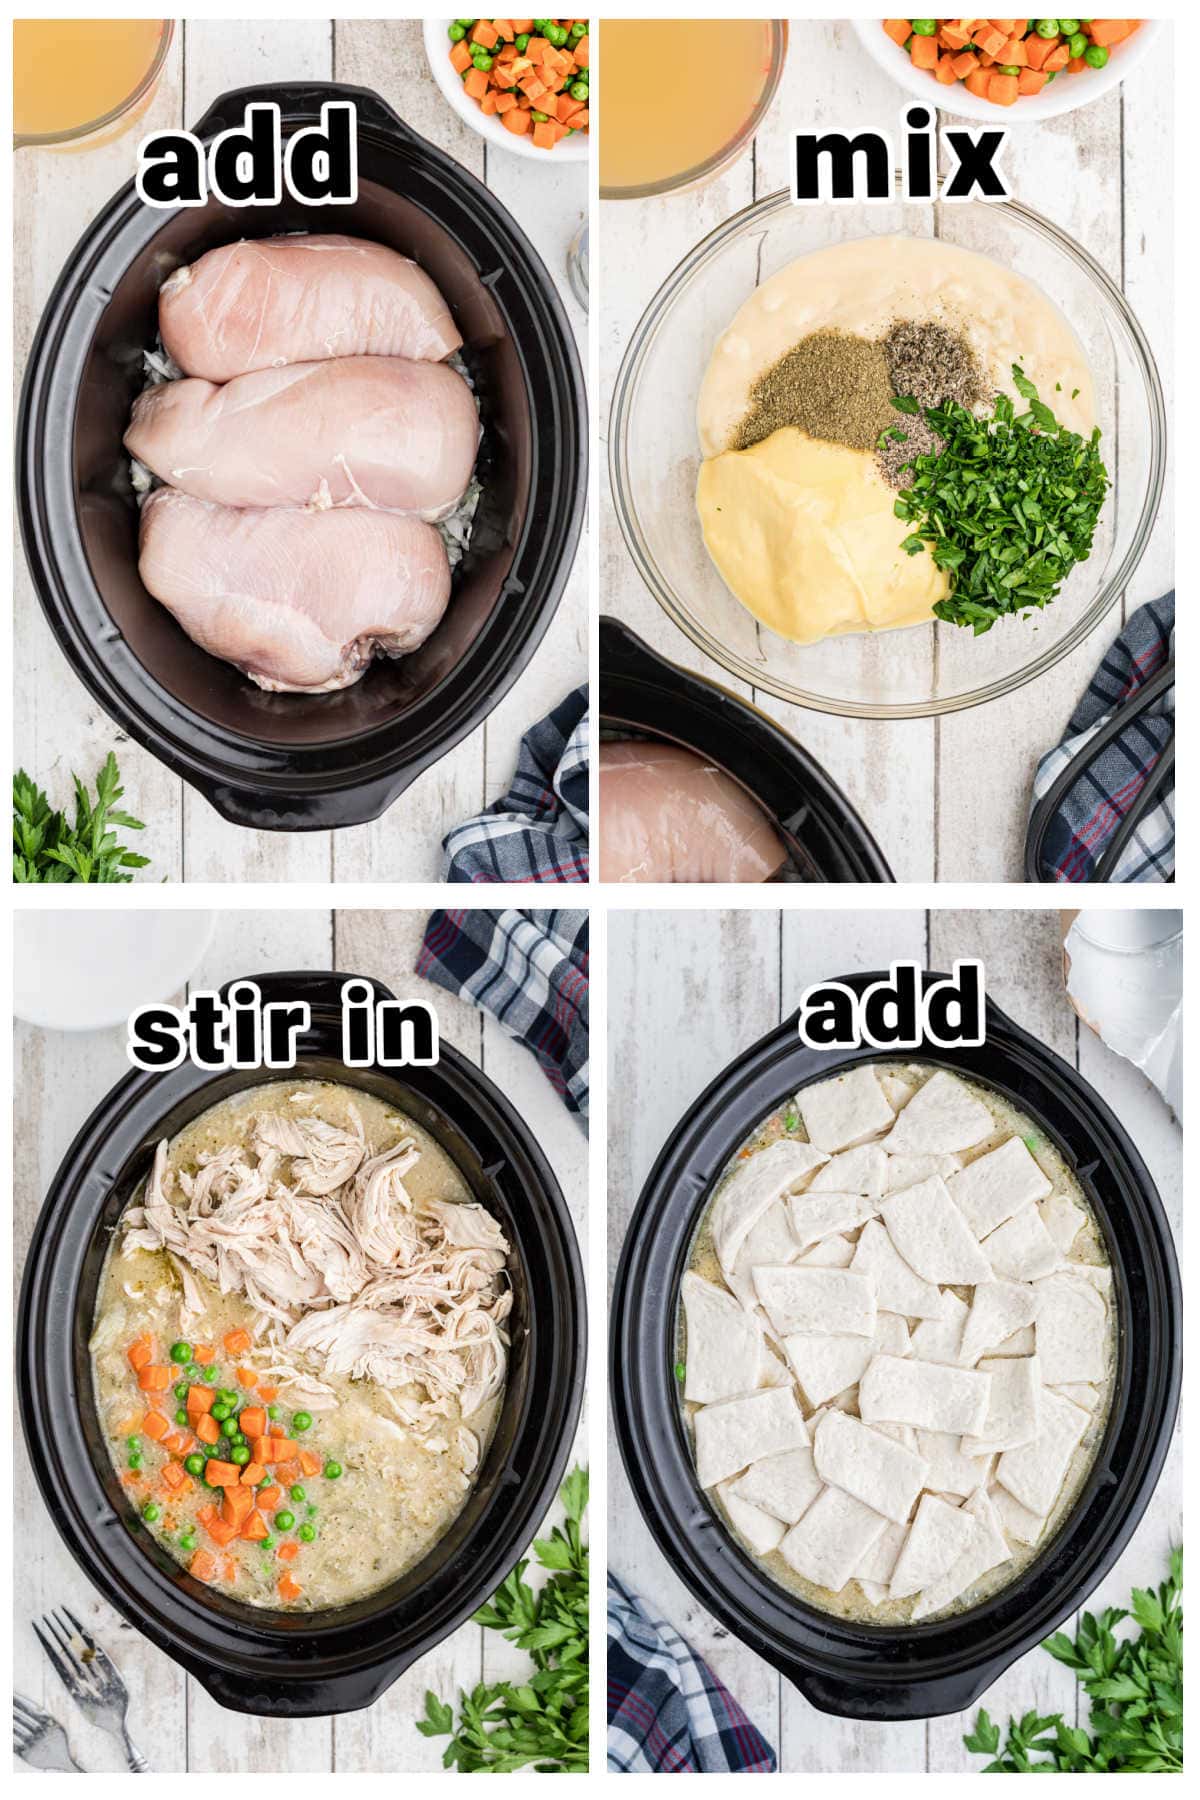 Step by step images showing how to make chicken & dumplings.